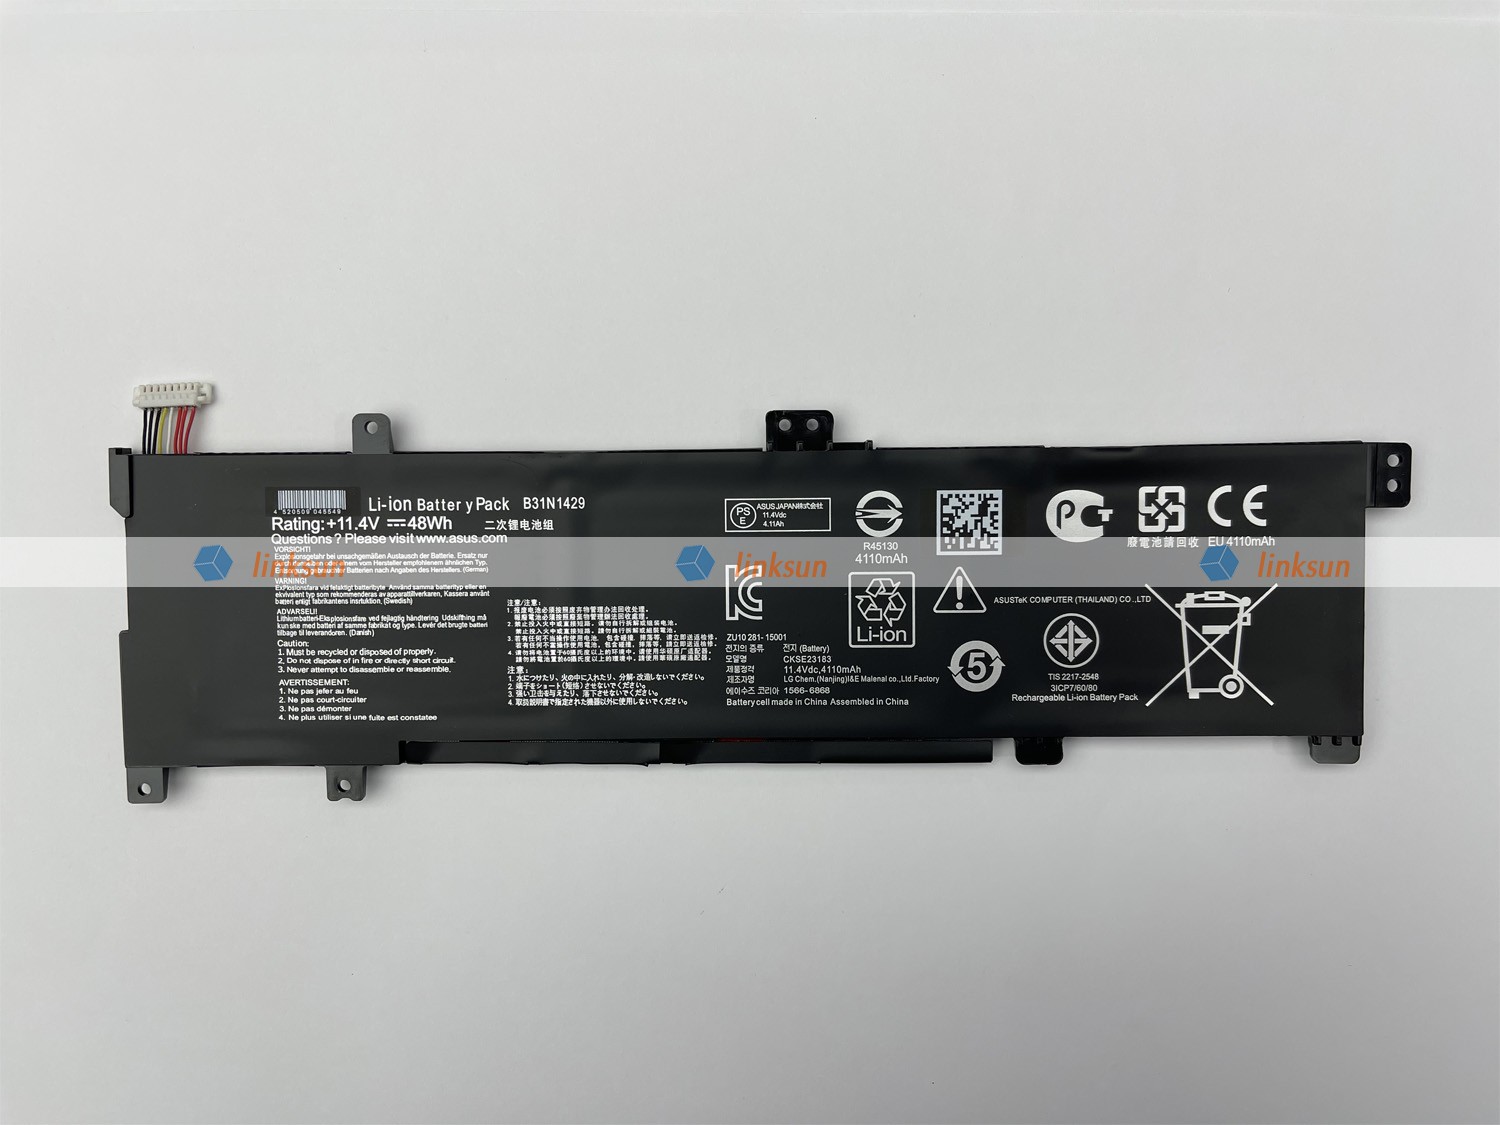 B31N1429 battery front